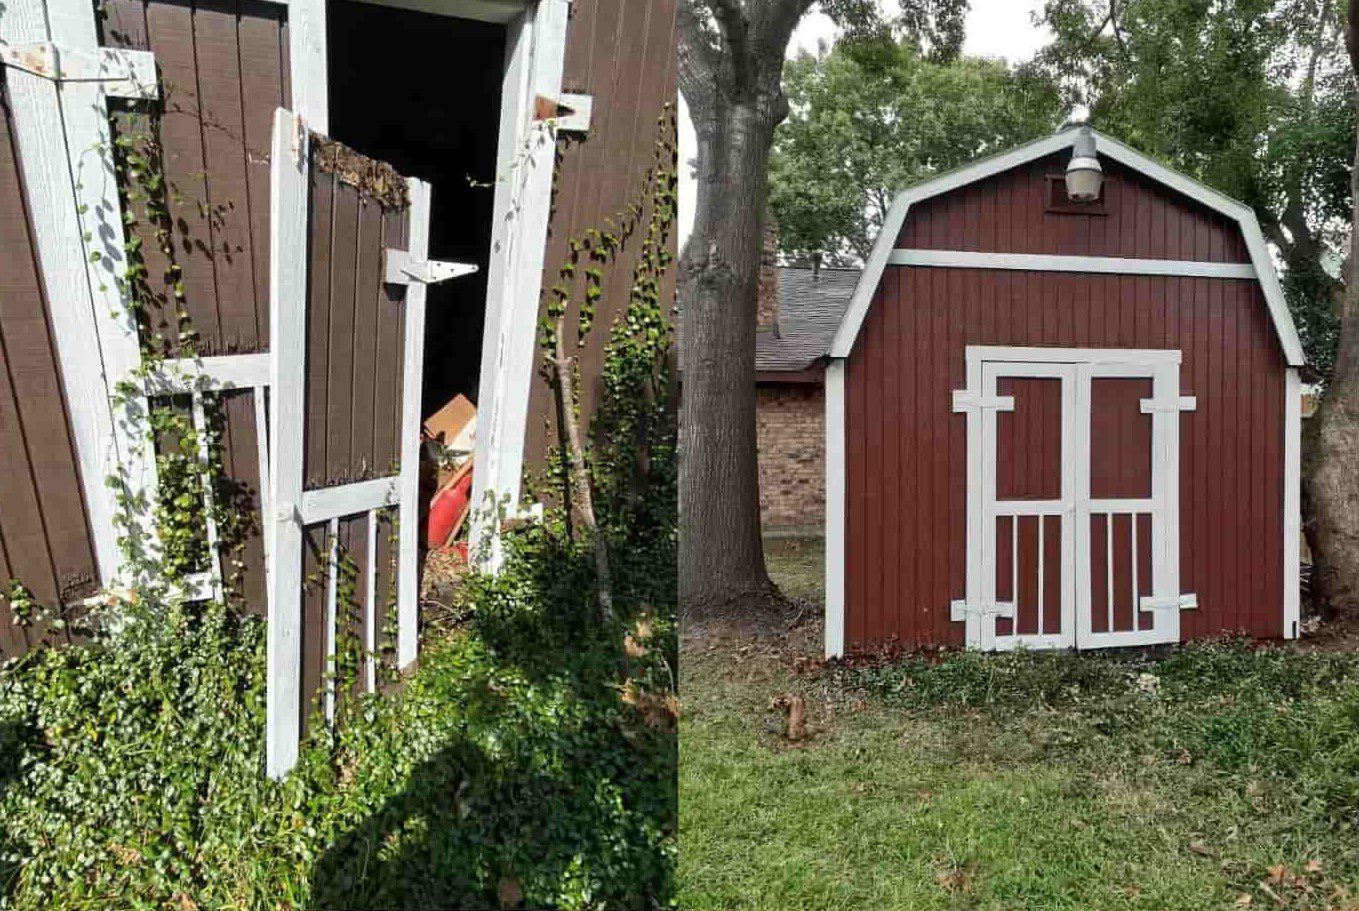 A remodeled shed